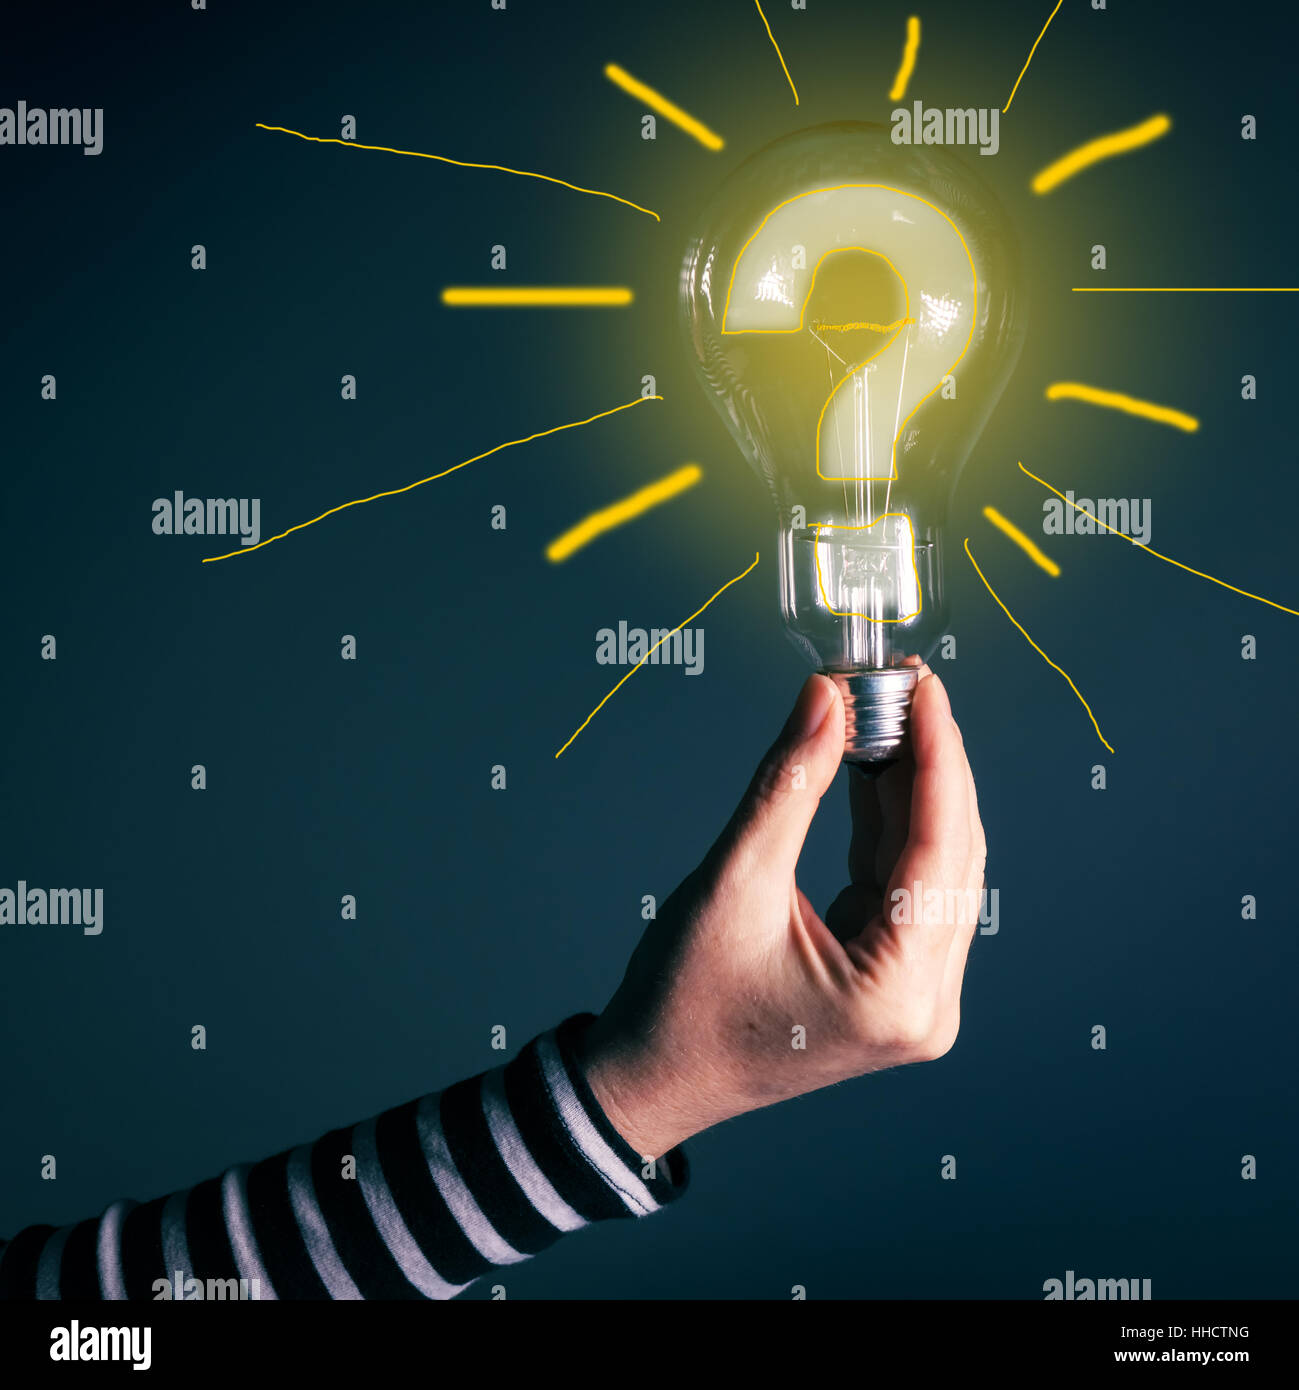 Hand with light bulb and question mark for innovation, inspiration, creativity, brainstorming, new ideas and imagination concept Stock Photo